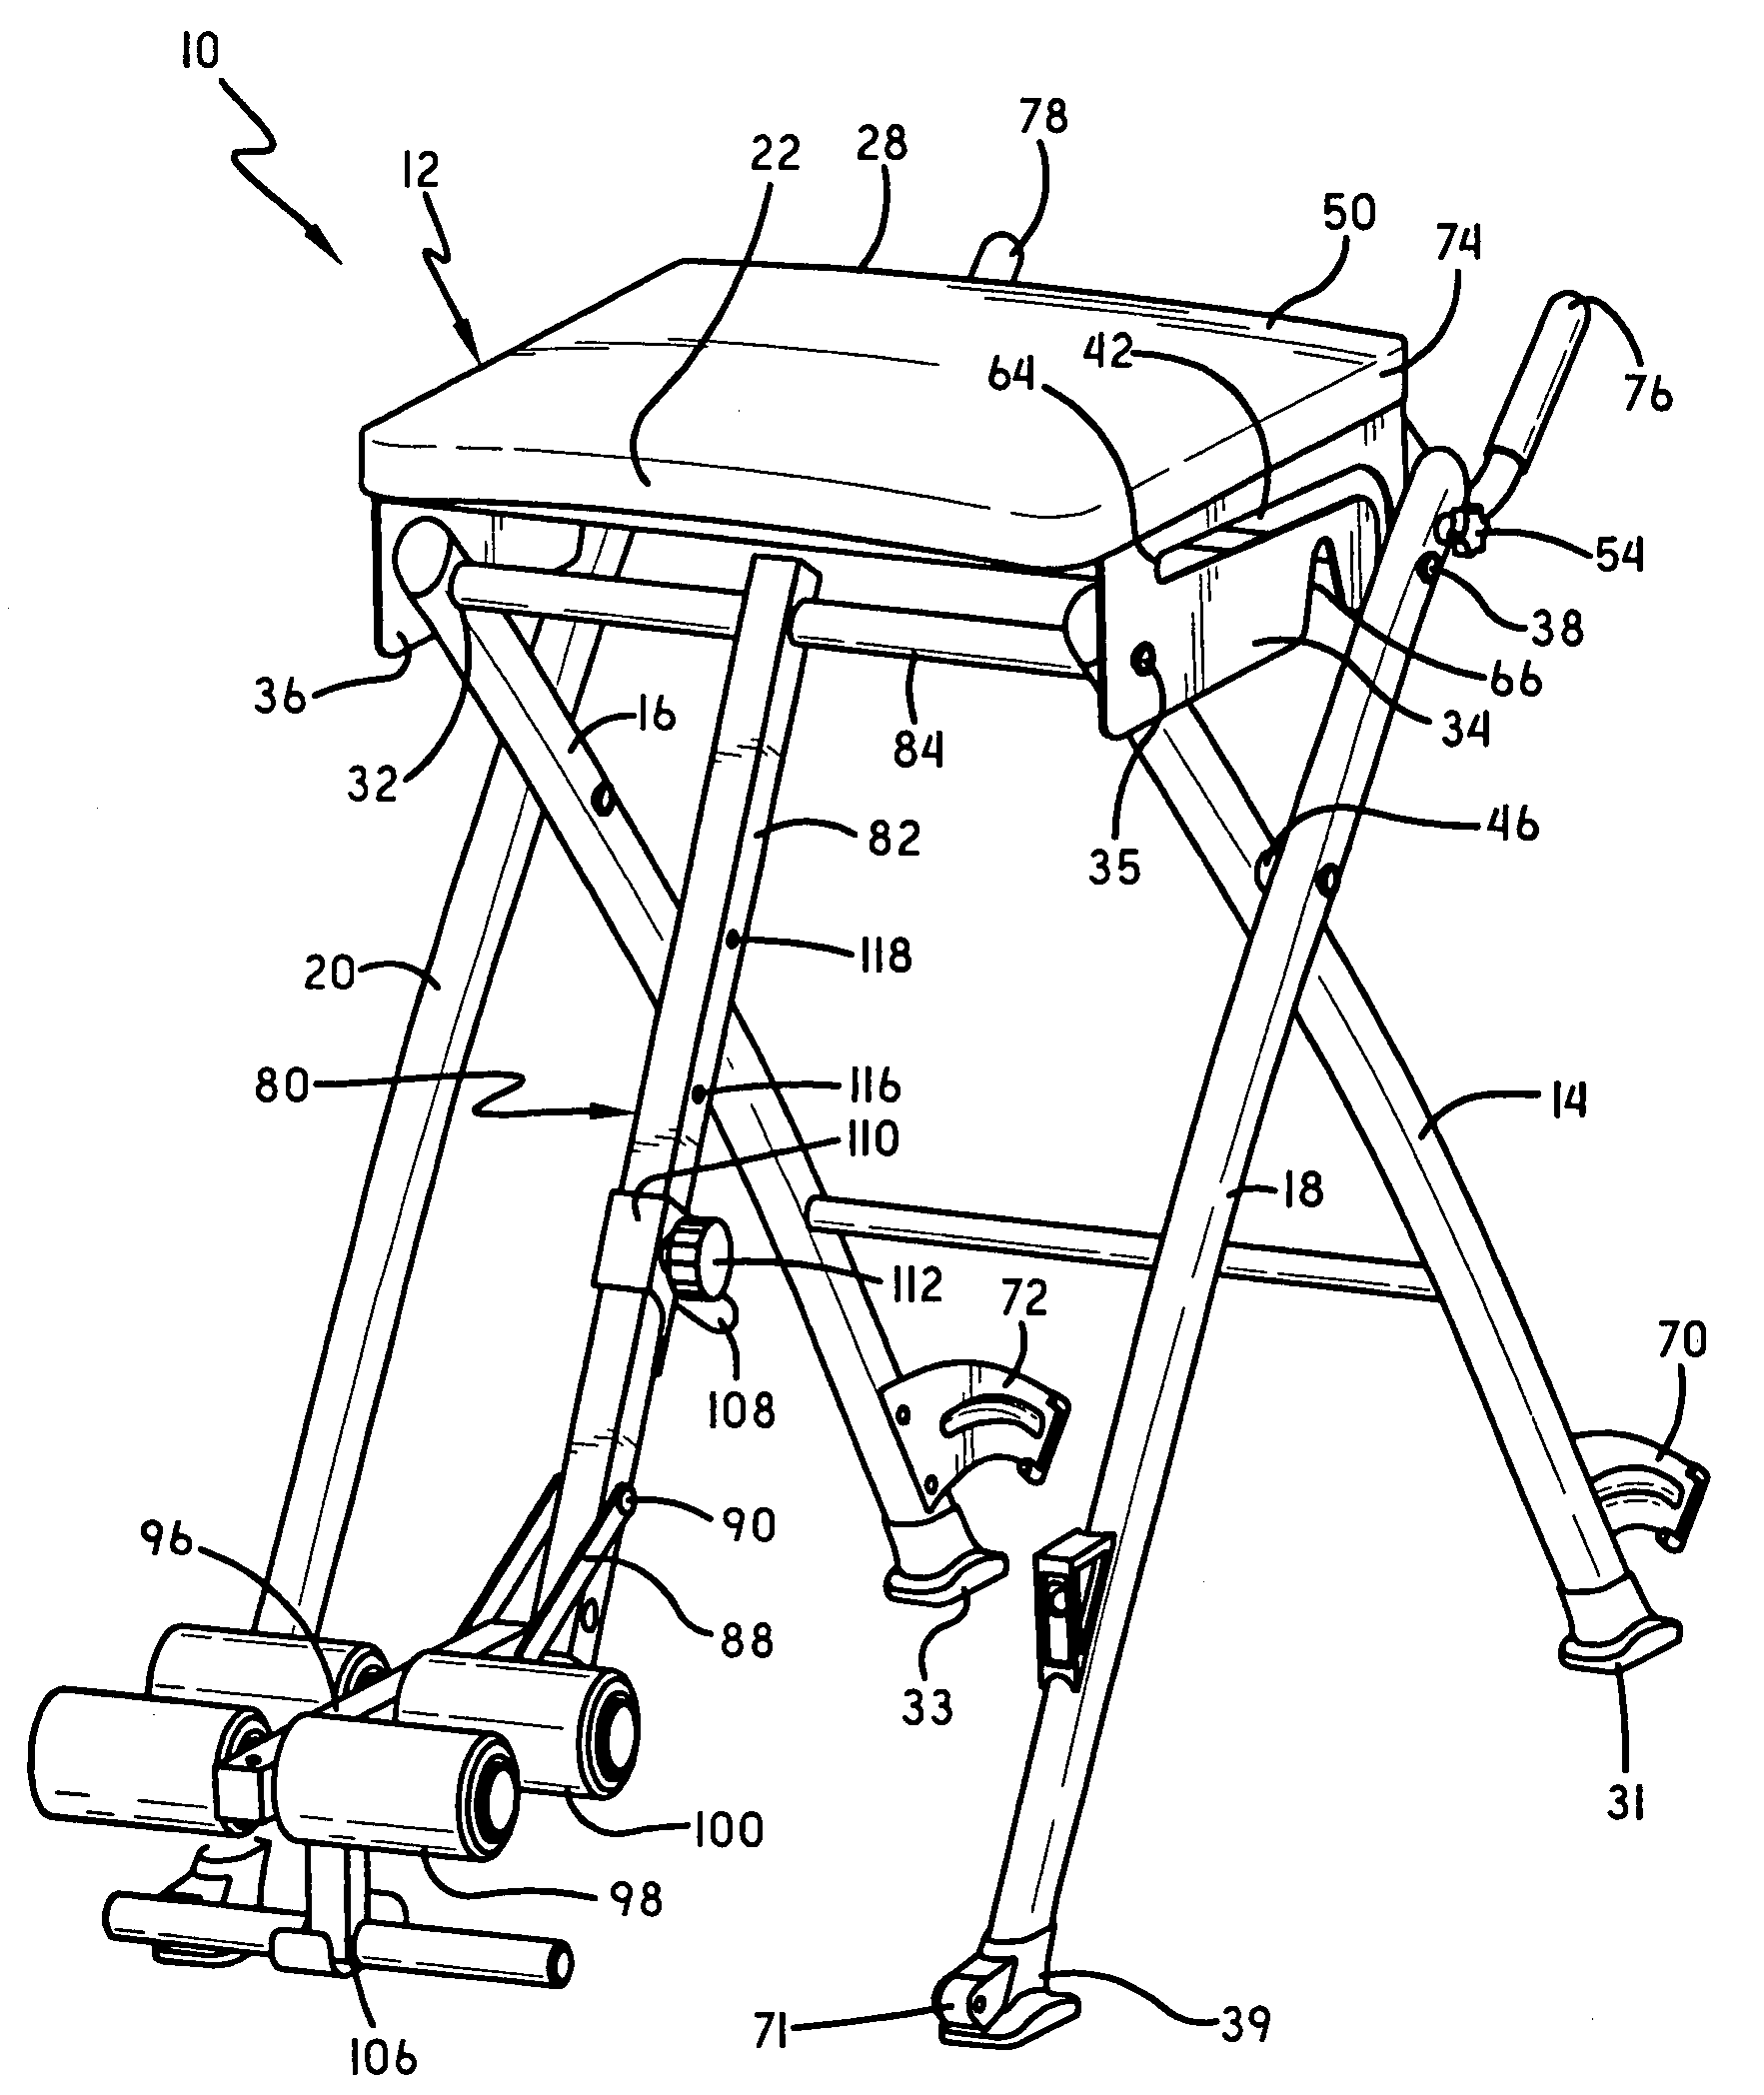 Collapsible and storable apparatus for exercising core muscles